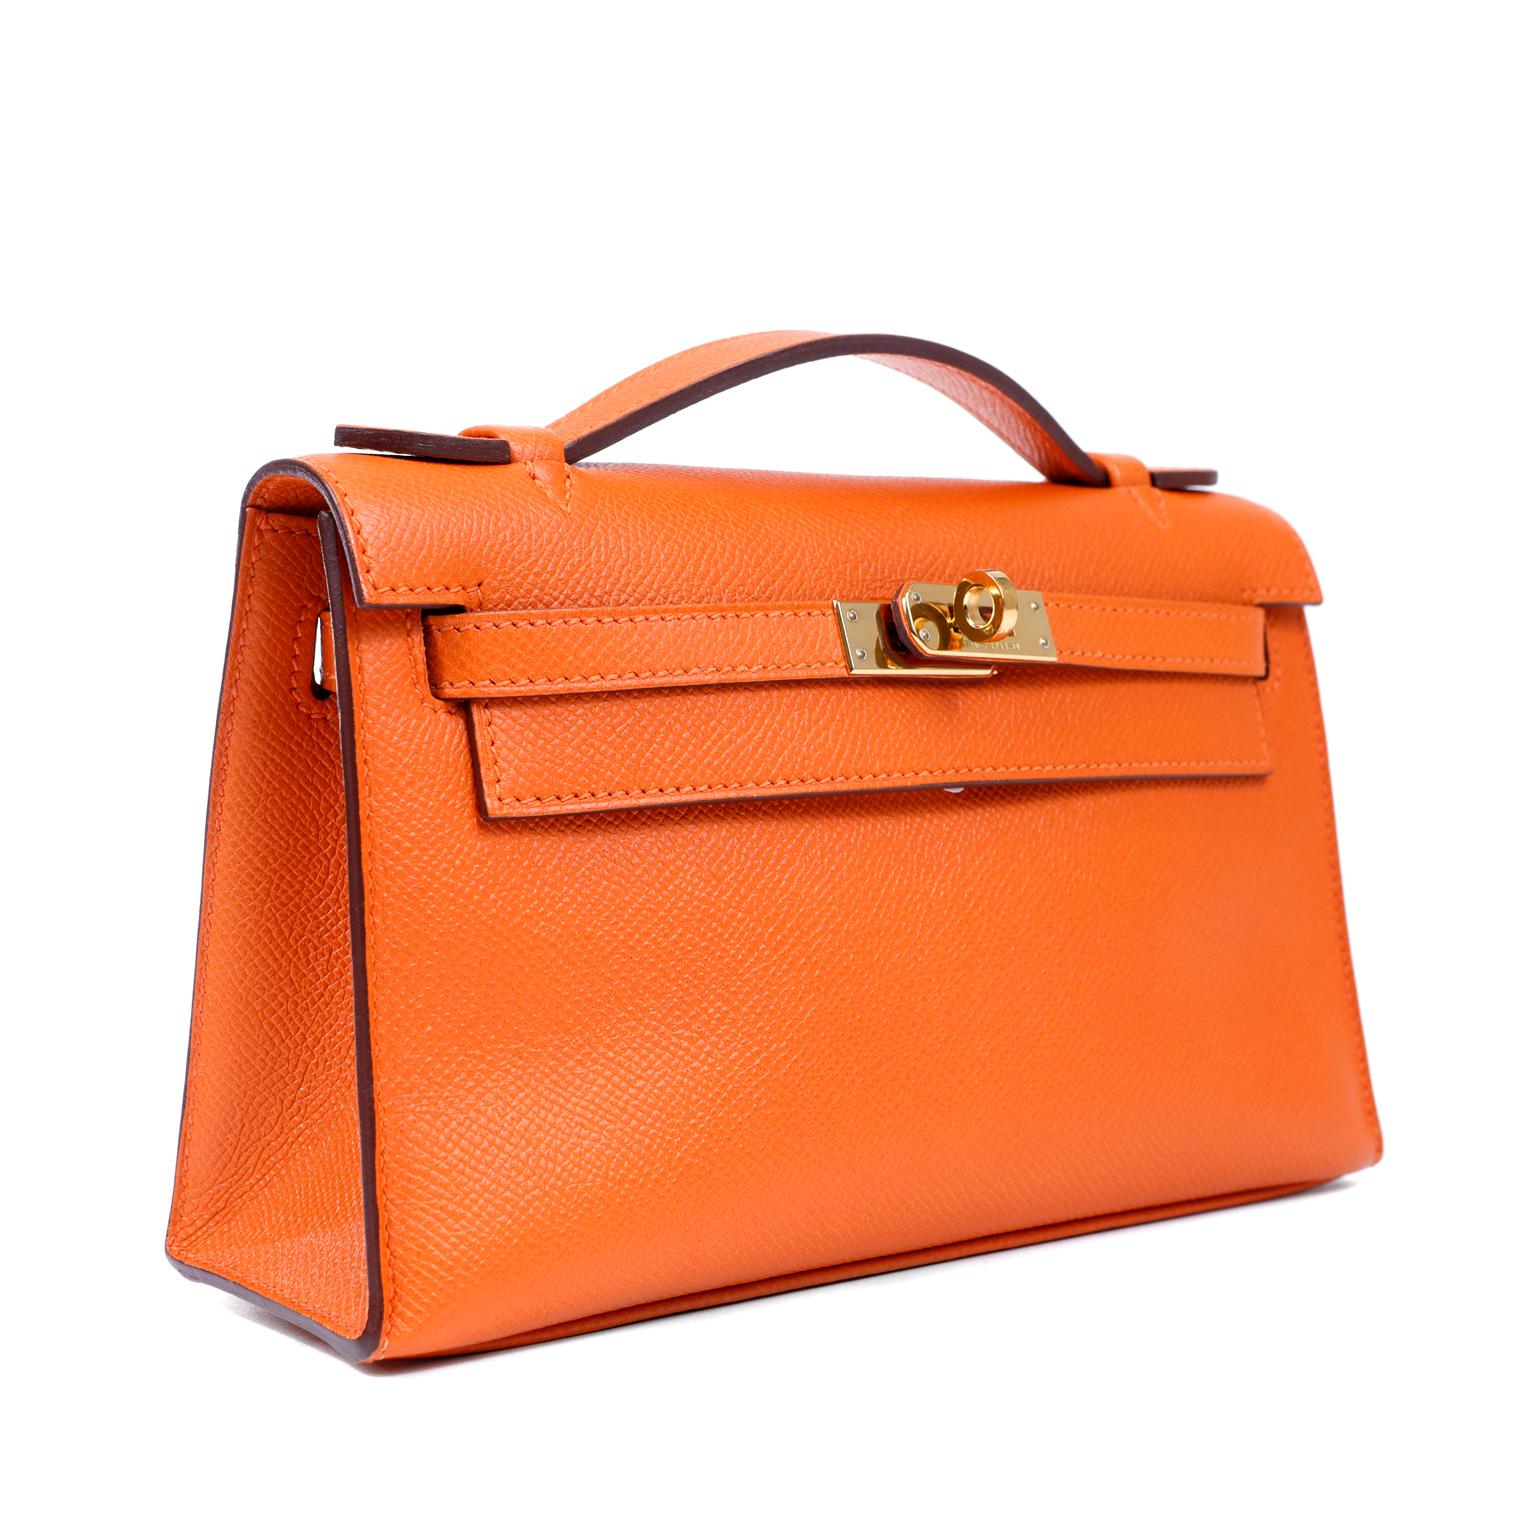 This authentic Hermès Orange Epsom Kelly Pochette is in pristine condition. A clutch version of the classic Kelly, it has a stable base allowing it to stand upright and easily carries all the essentials for an evening.
Epsom leather is textured and